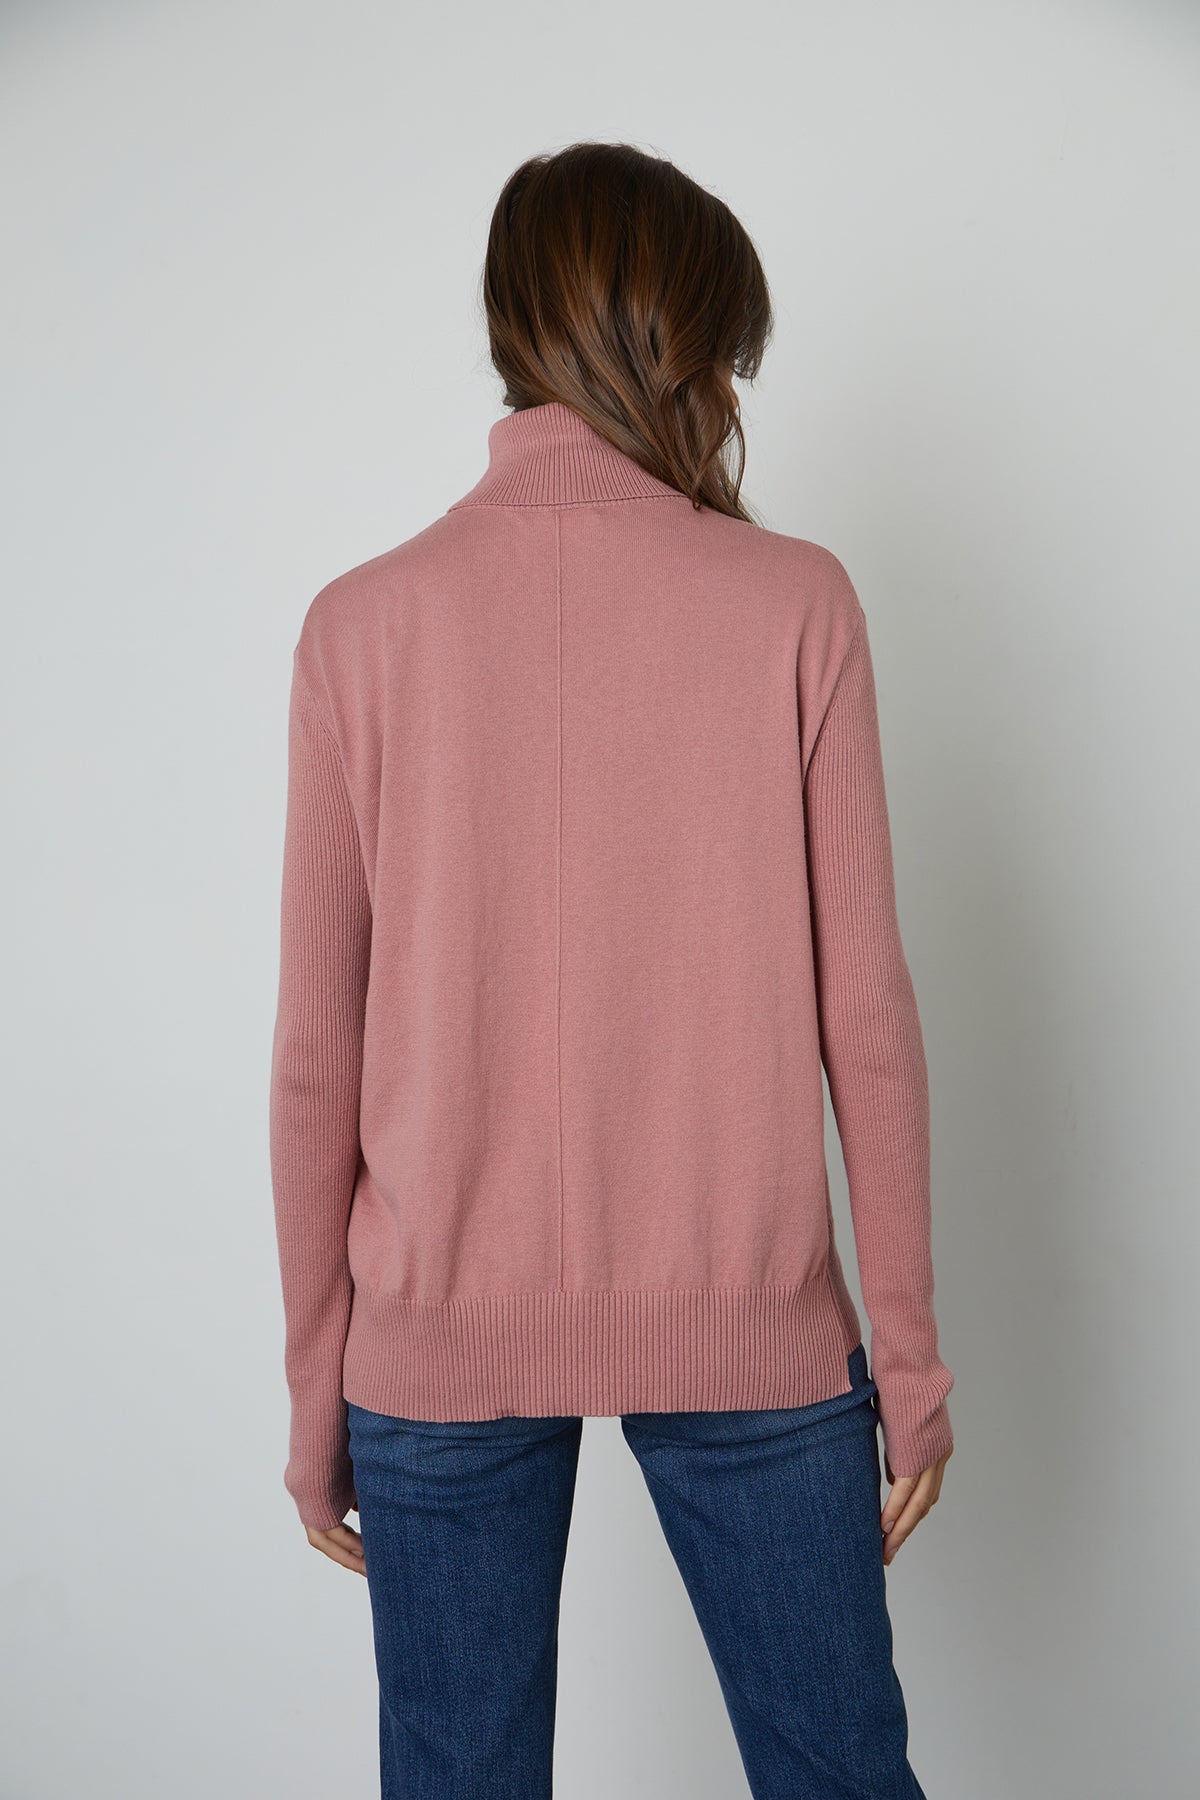   The back view of a woman wearing a Velvet by Graham & Spencer RENNY TURTLENECK SWEATER is perfect for fall layering. 